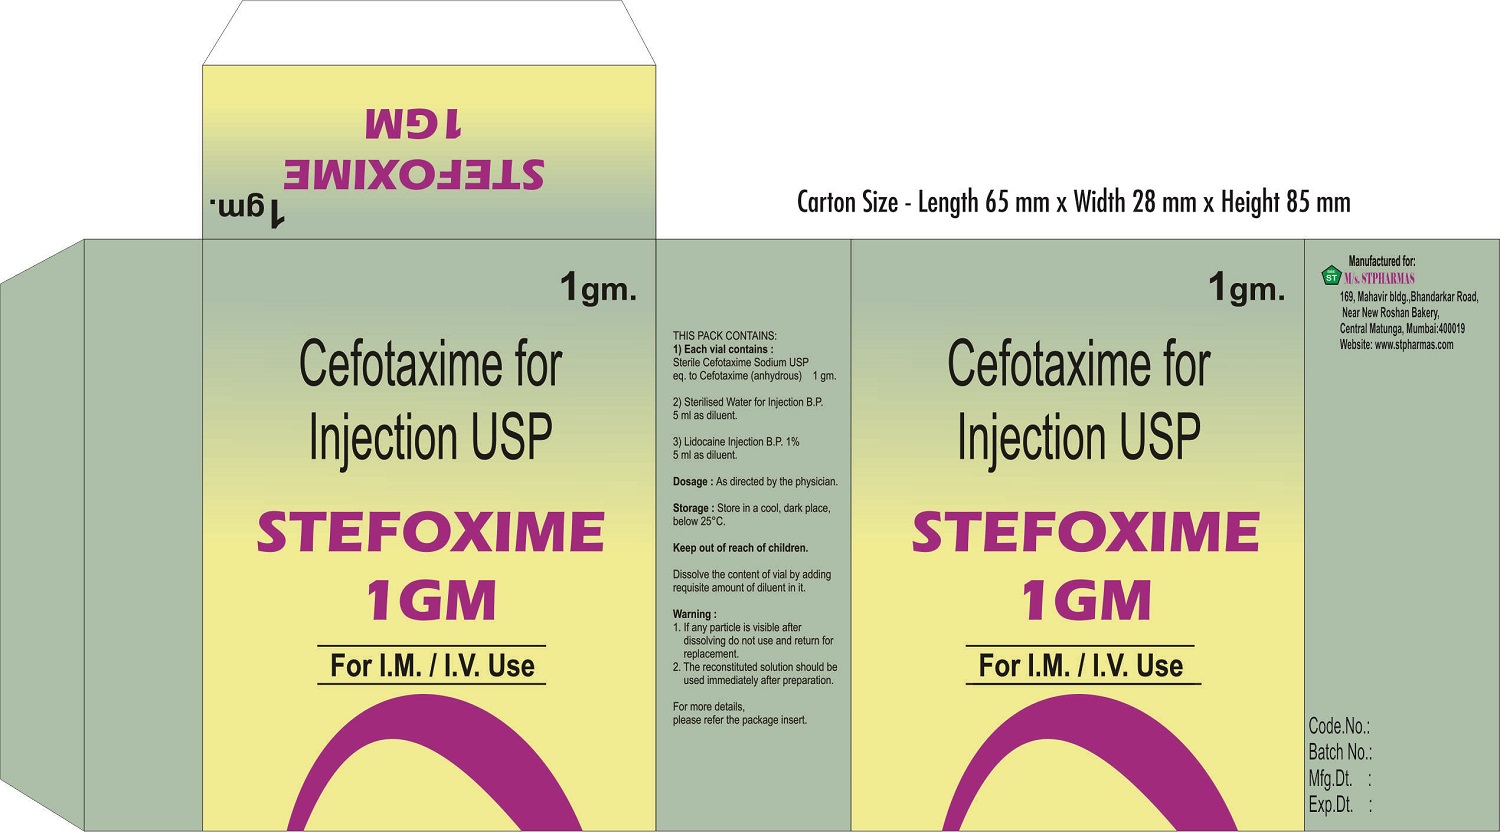 STEFOXIME-1GM